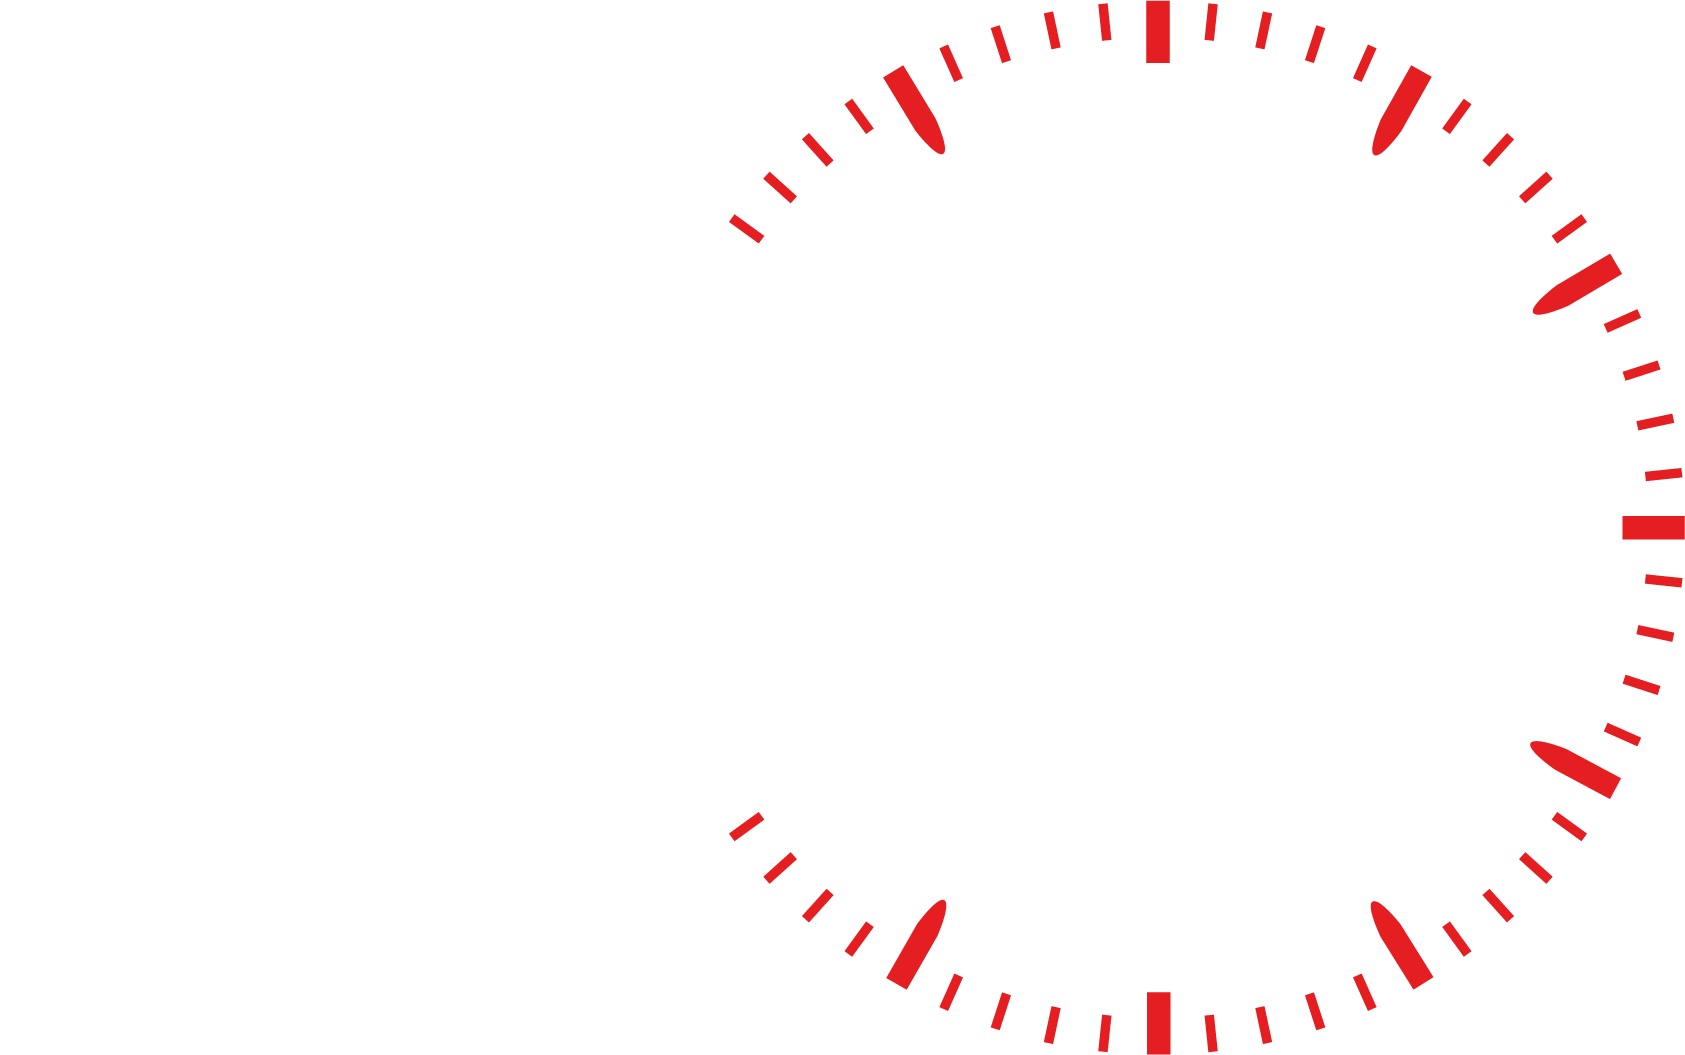 The Swiss Collector